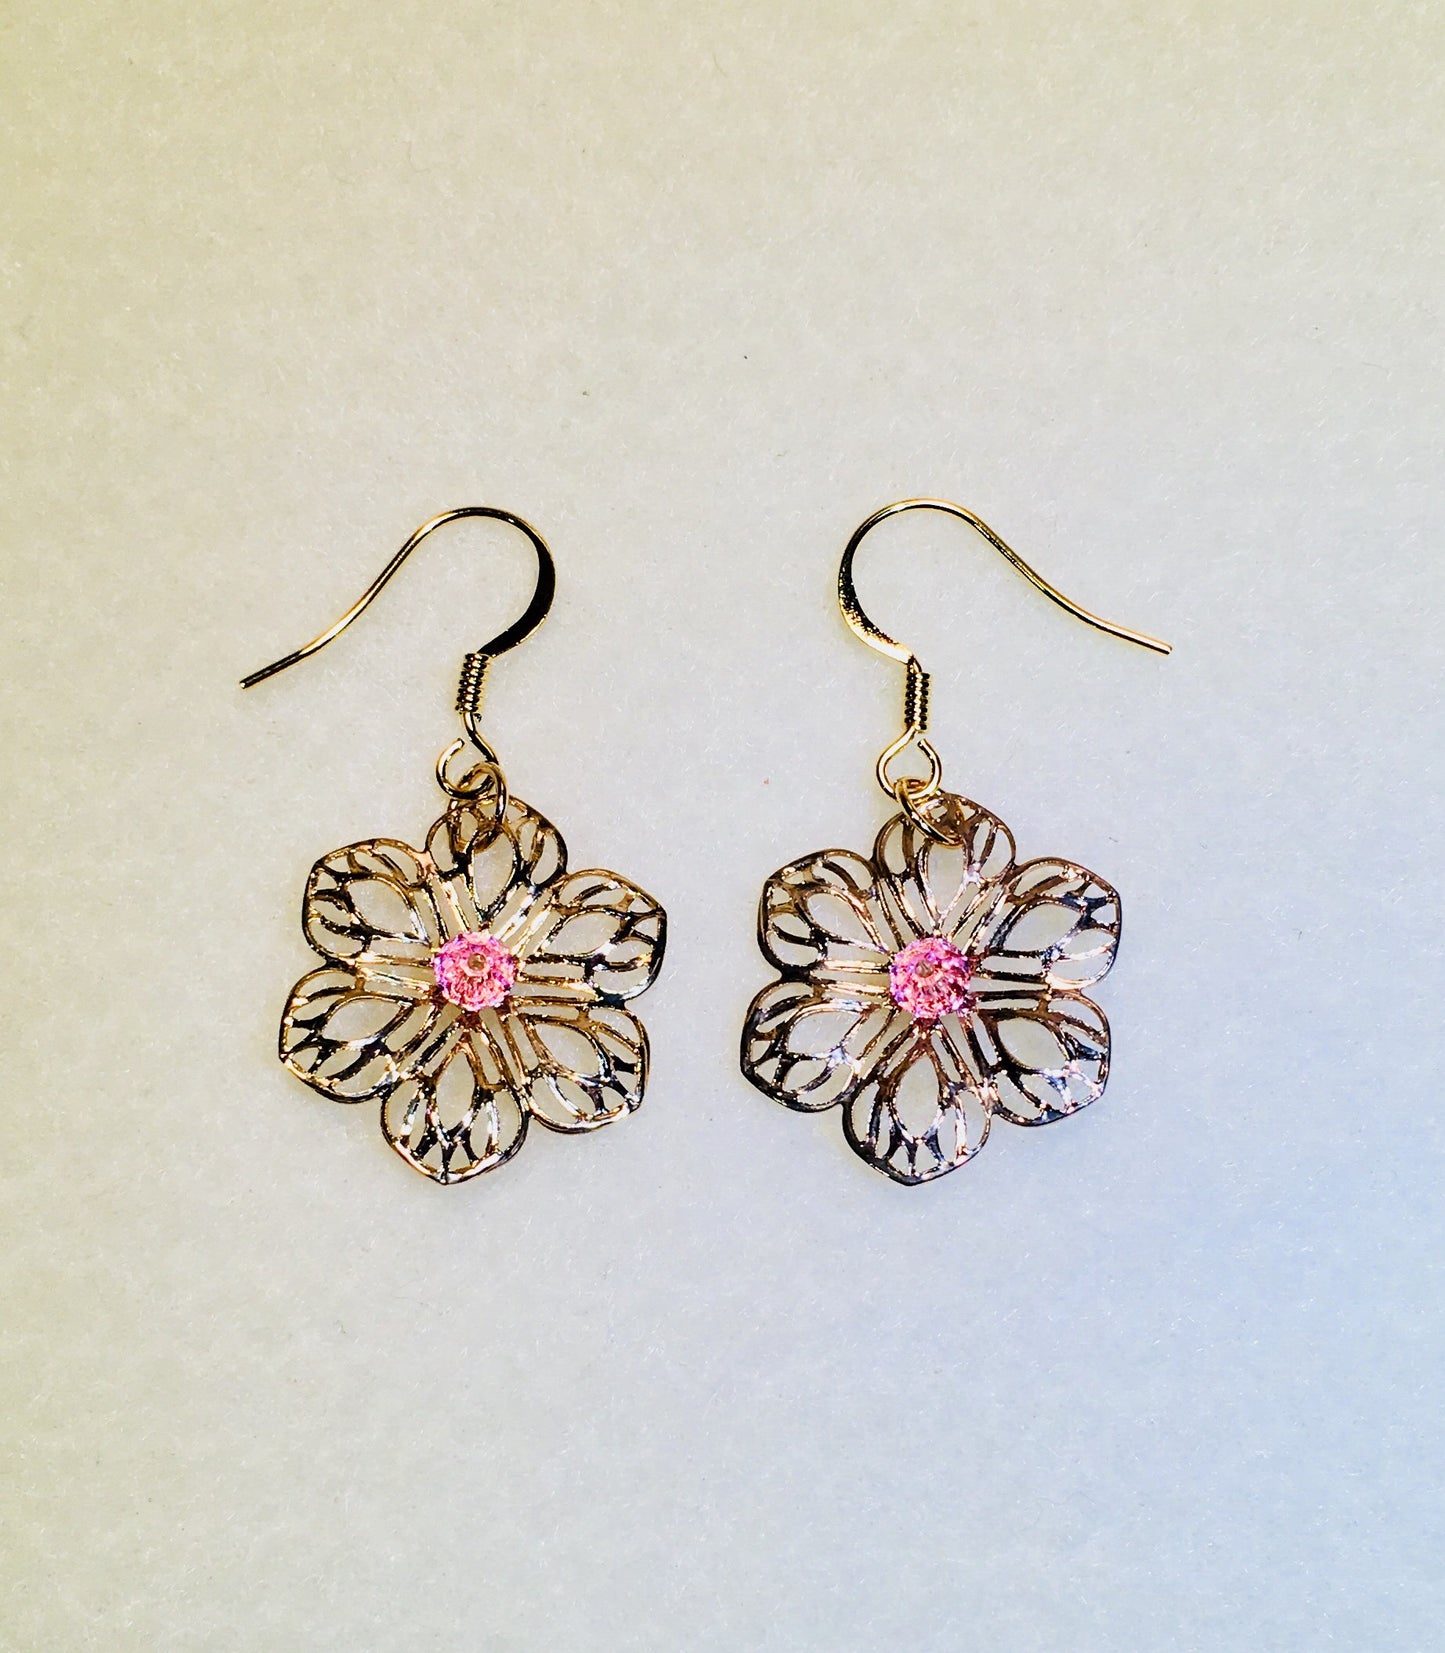 14K Gold Plated Filigree Flower Earrings with Pink or Blue Swarovski Crystals, 38L x 21W mm